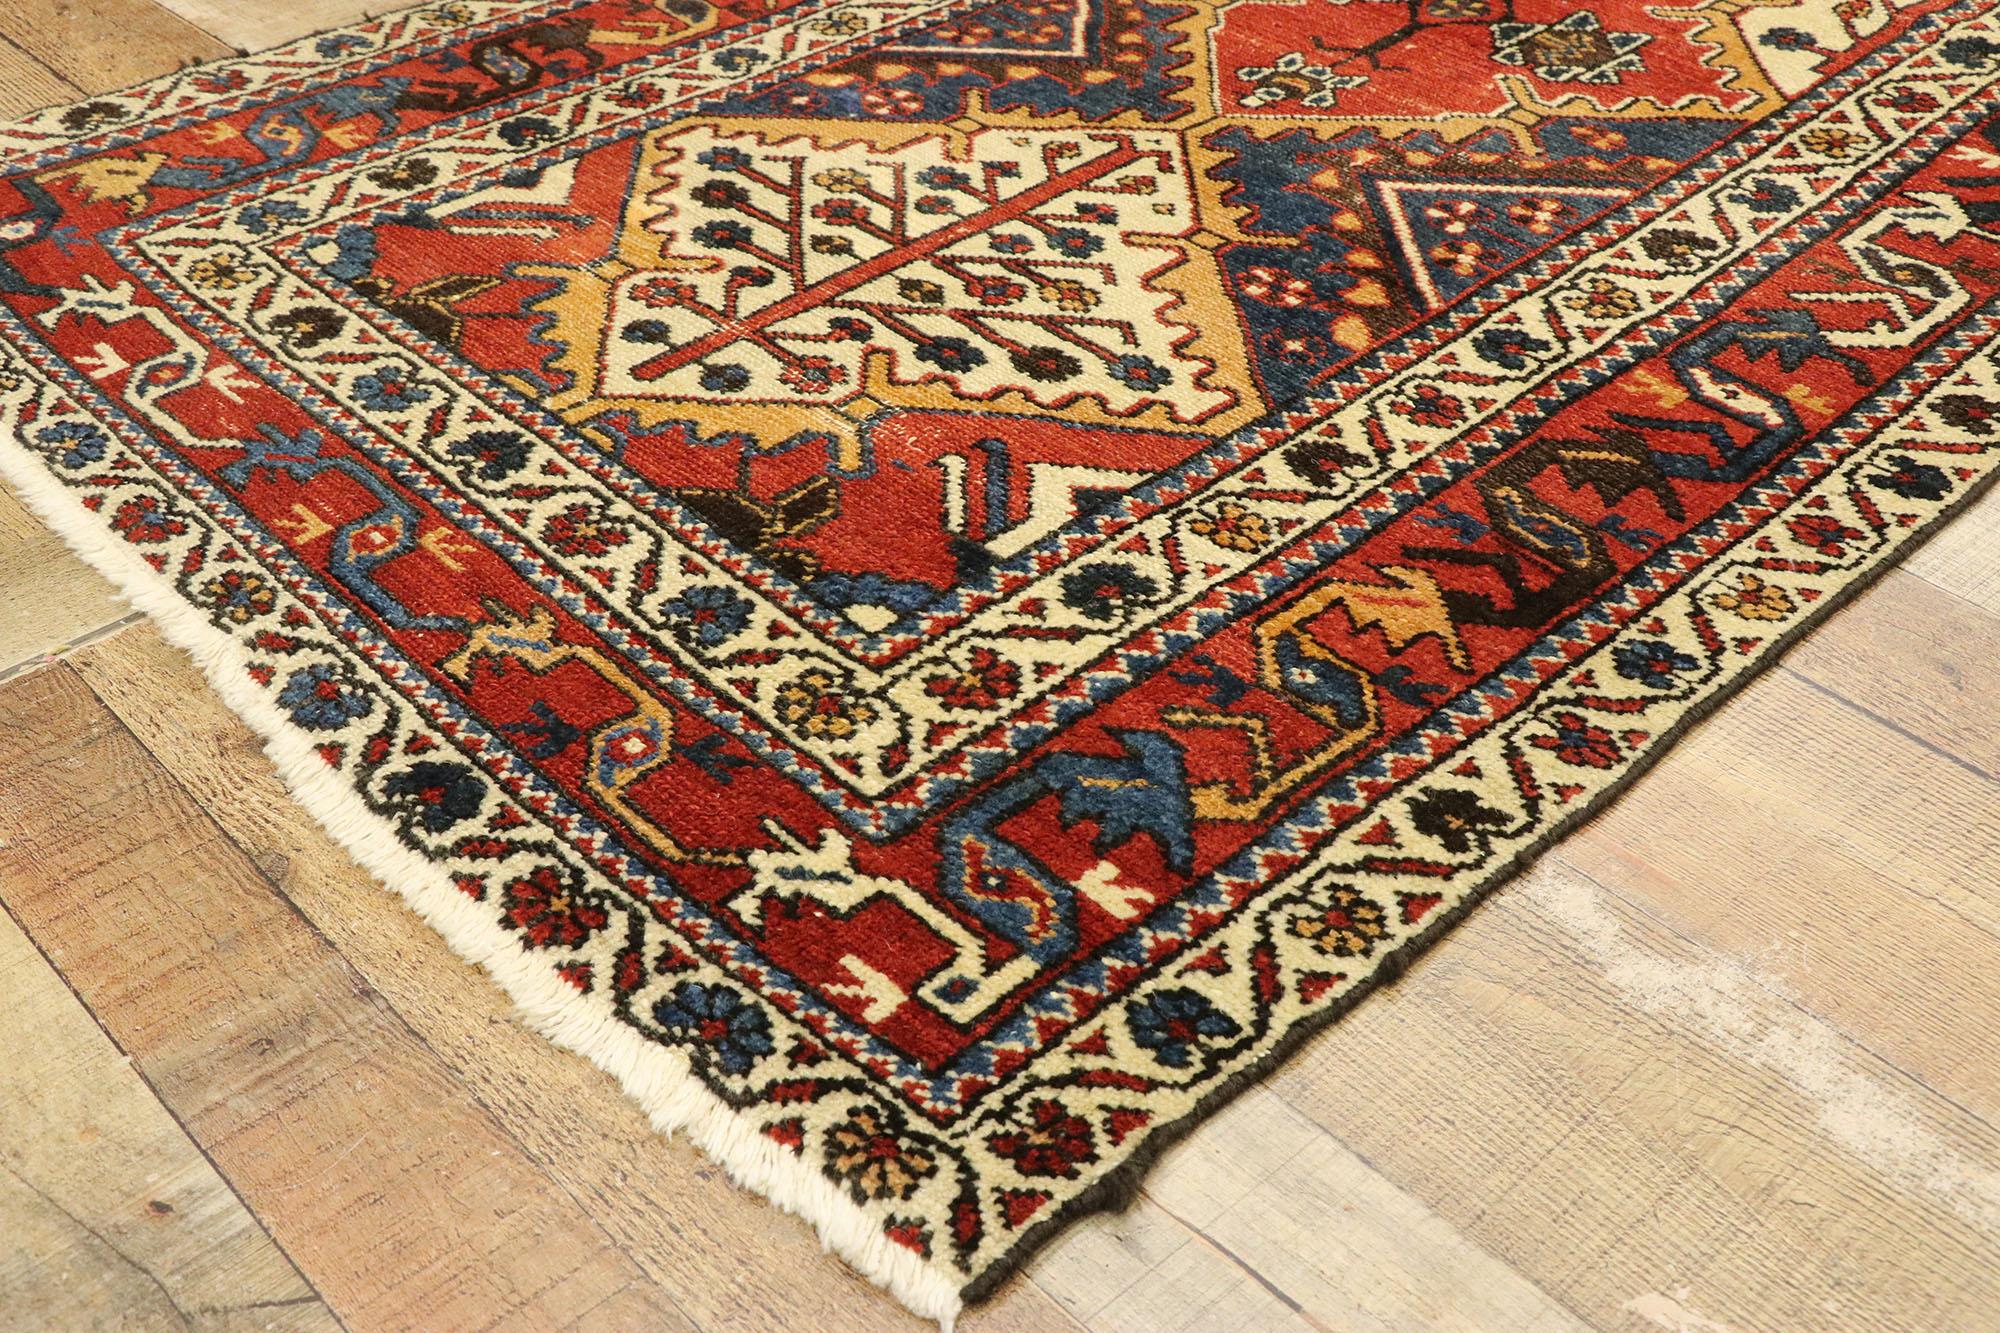 20th Century Antique Persian Bakhtiari Runner with Modern Rustic Pacific Northwest Style